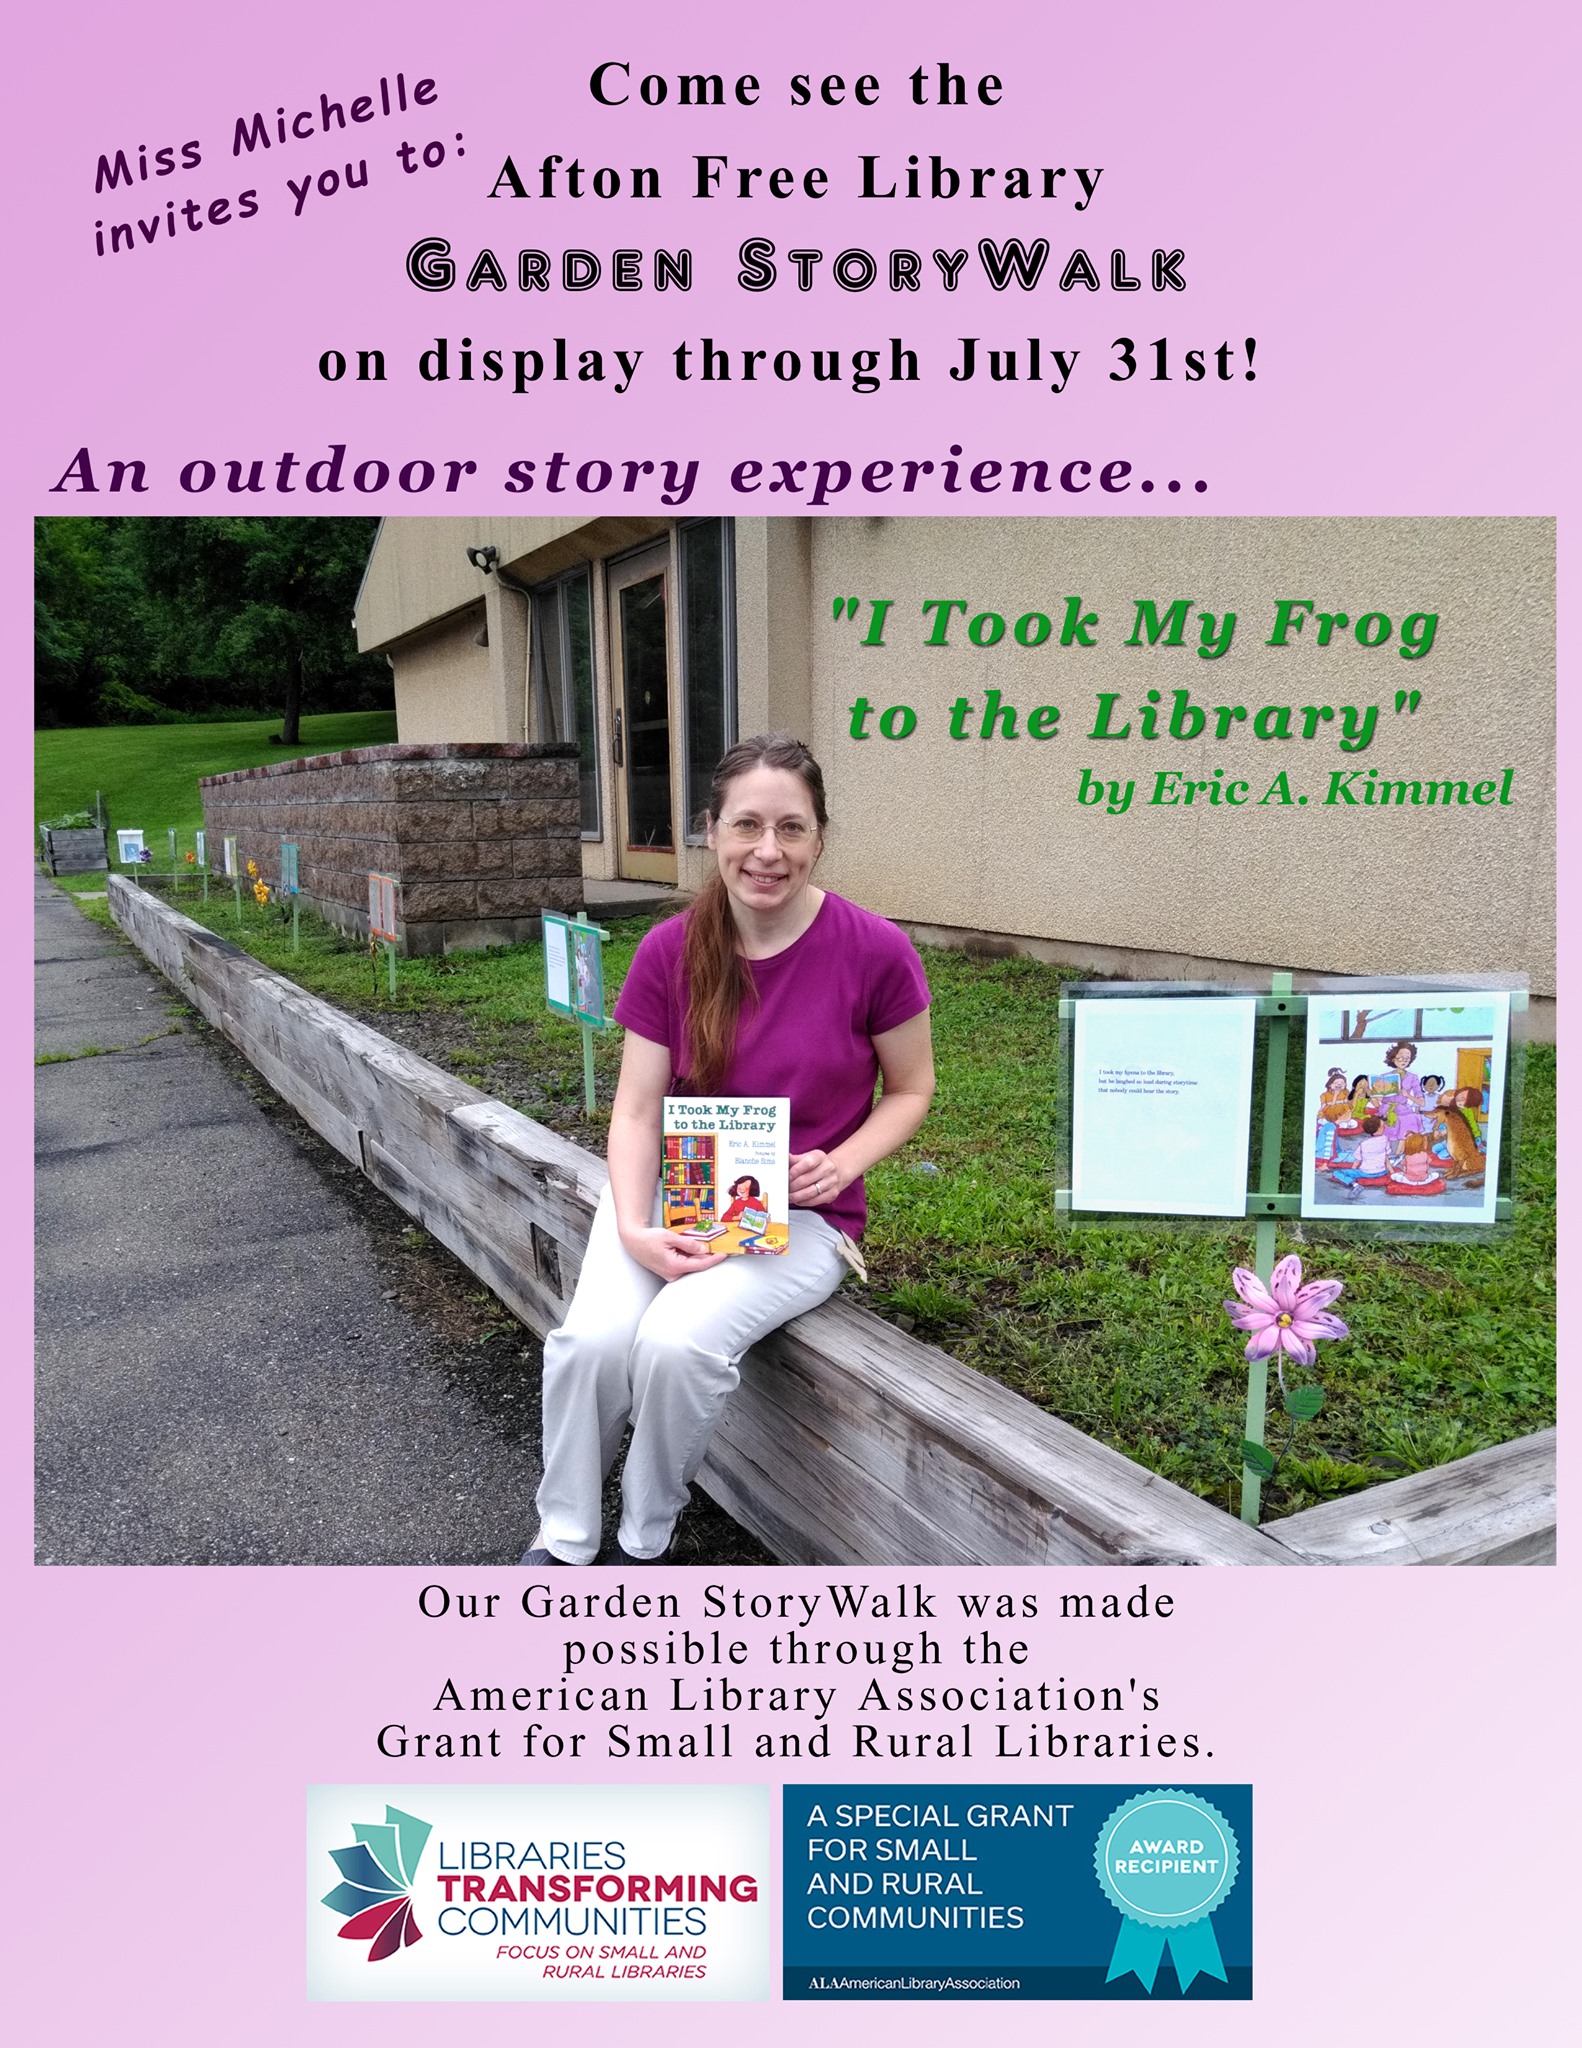 Garden Storywalk is on display through the month of July.